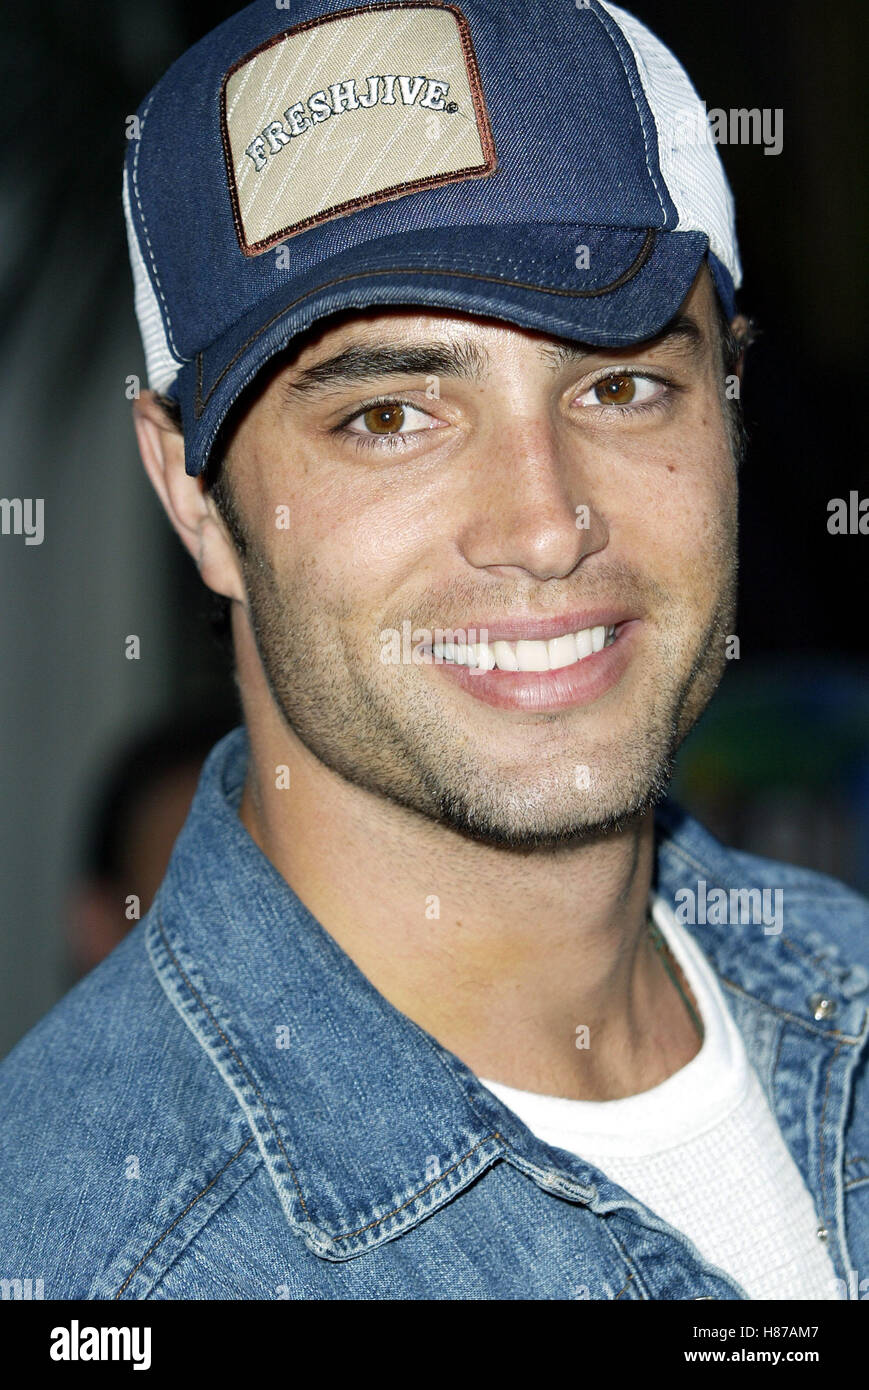 VICTOR WEBSTER BRUCE ALMIGHTY PREMIÈRE MONDIALE UNIVERSAL AMPHITHEATRE LOS ANGELES USA 14 mai 2003 Banque D'Images